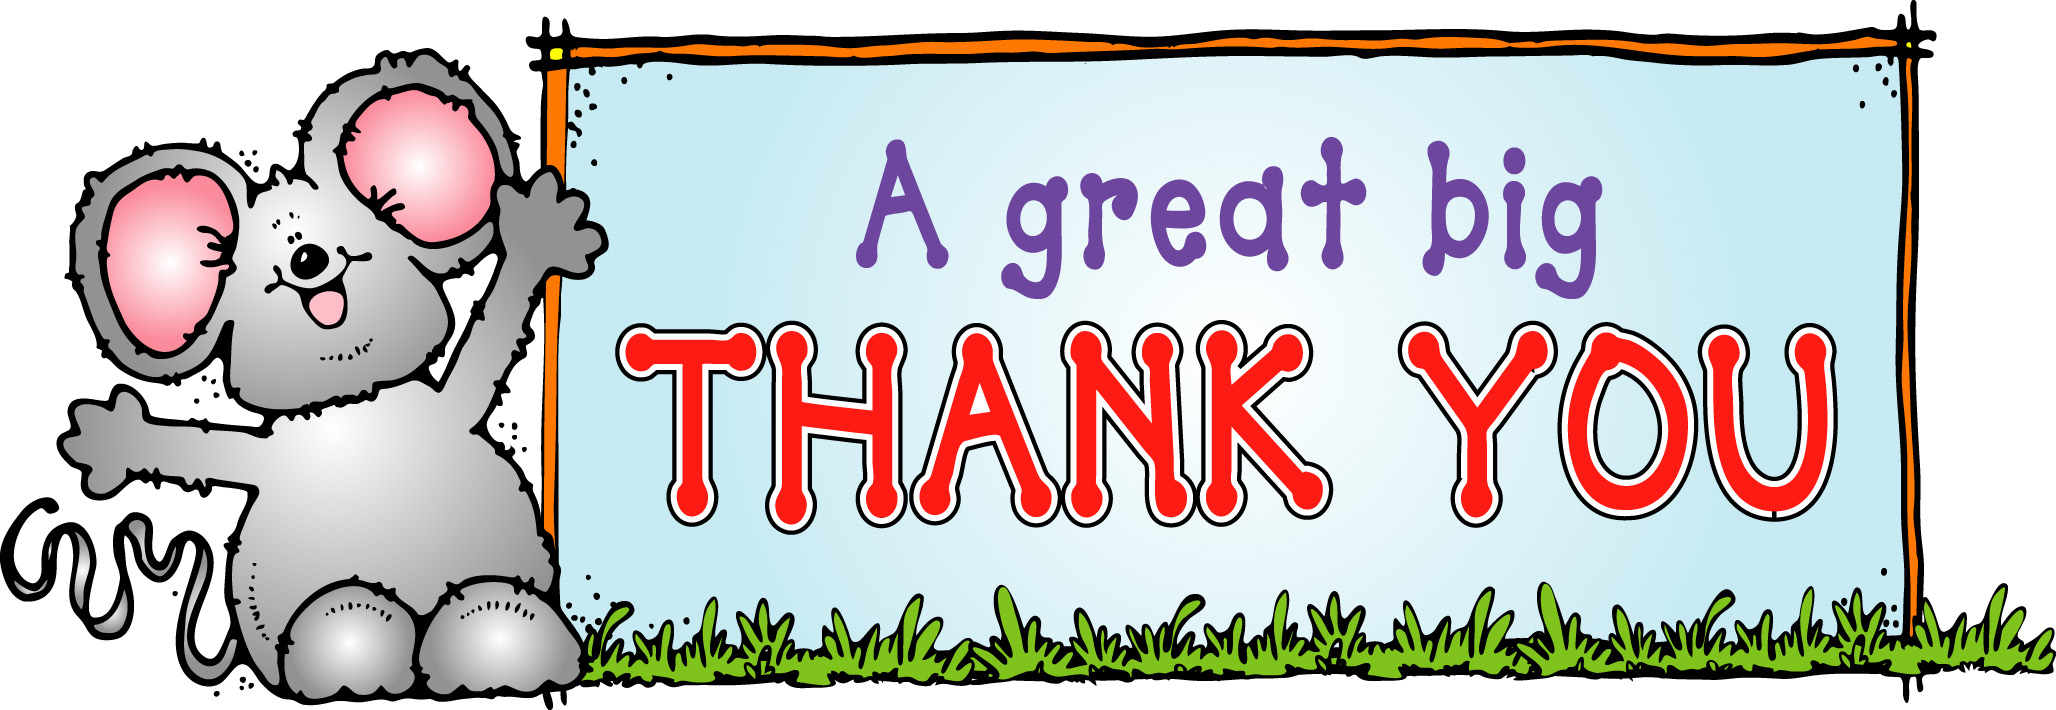 funny thank you clipart - photo #2